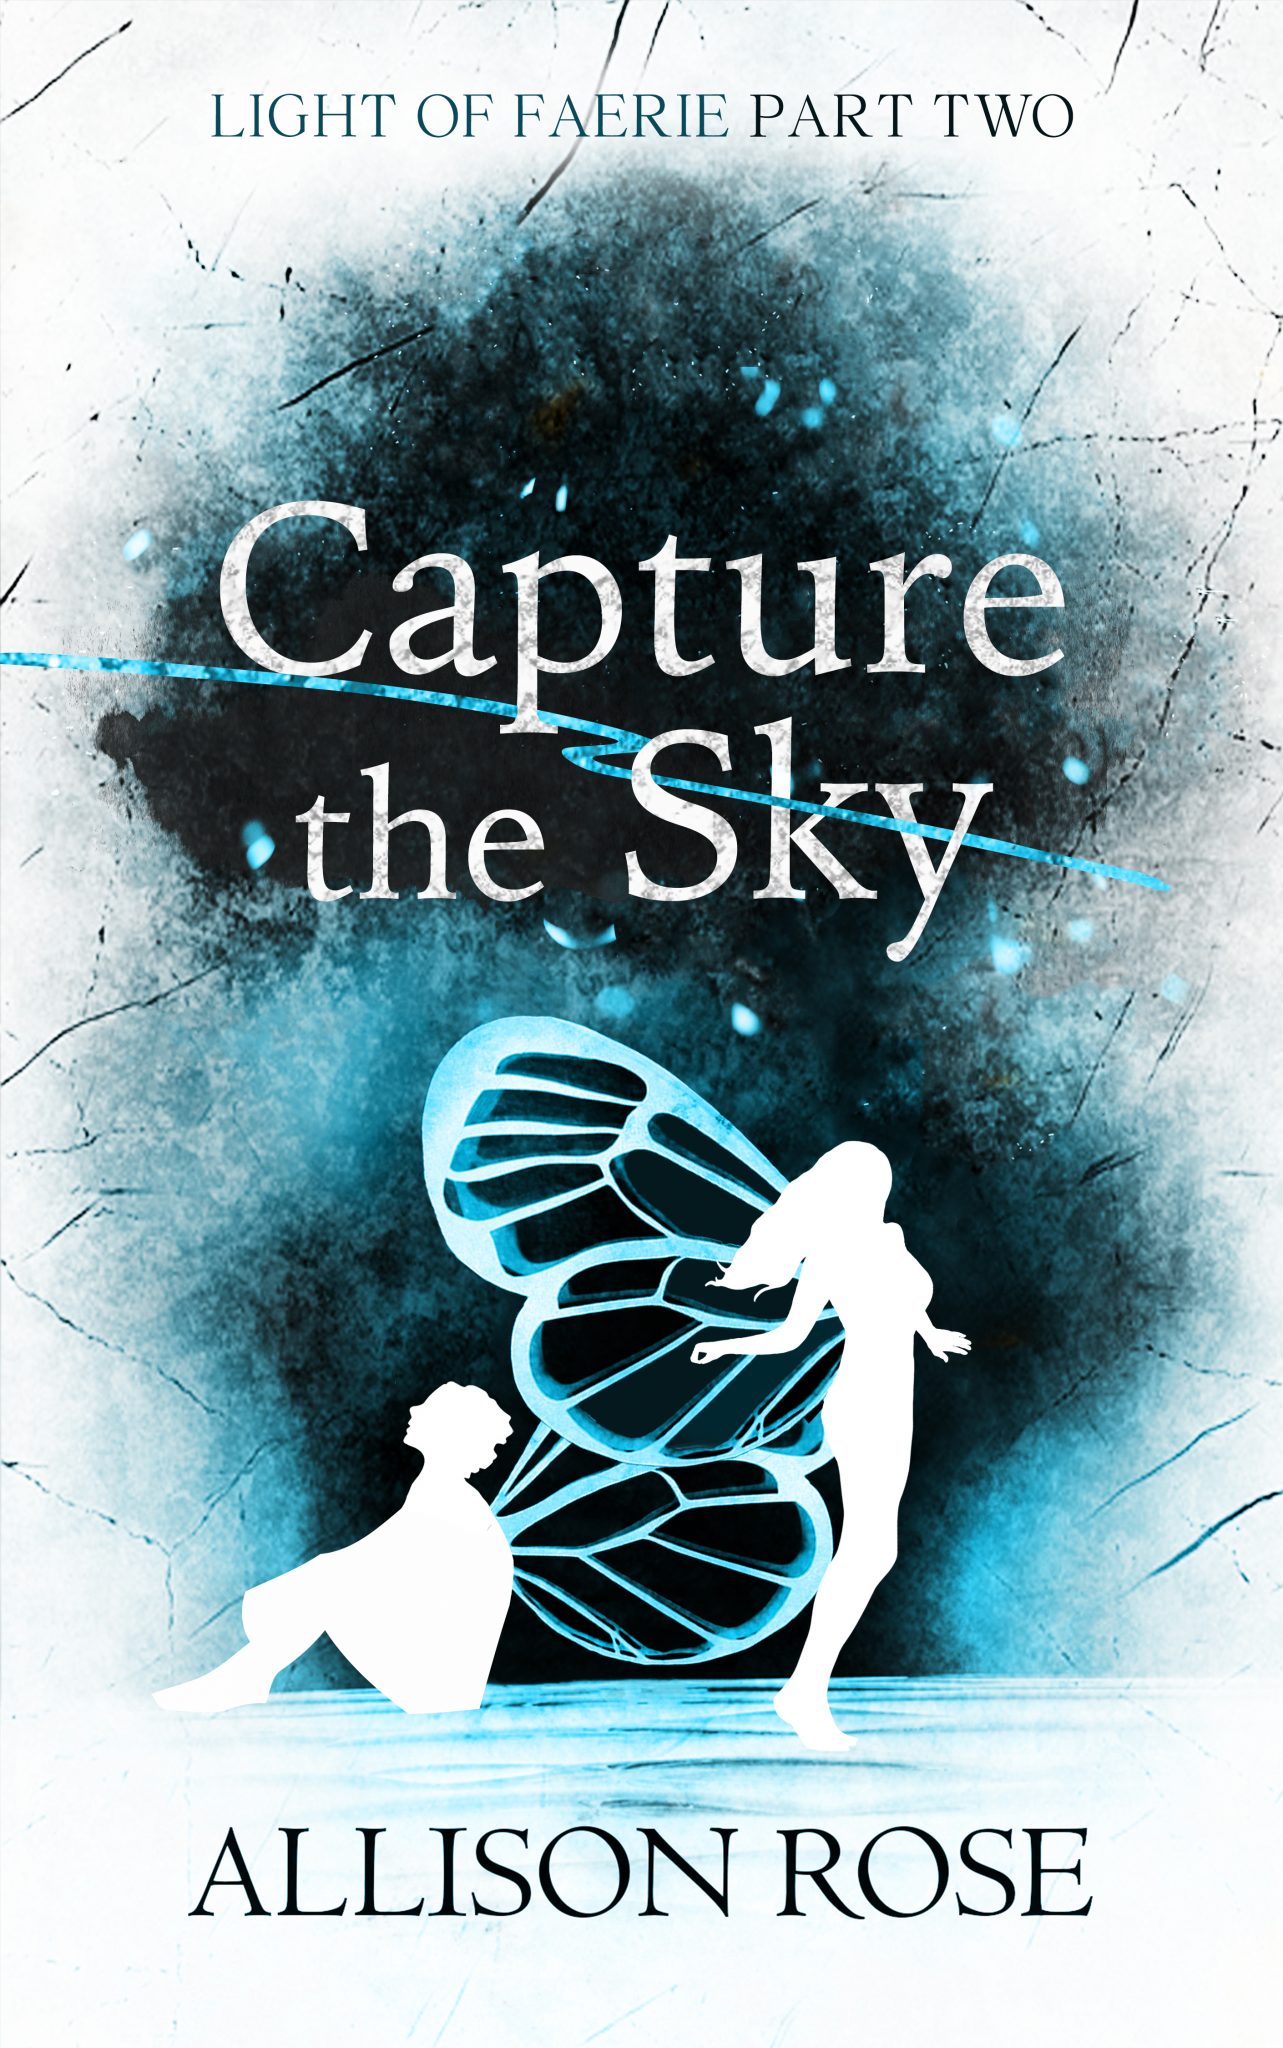 Capture the Sky by Allison Rose